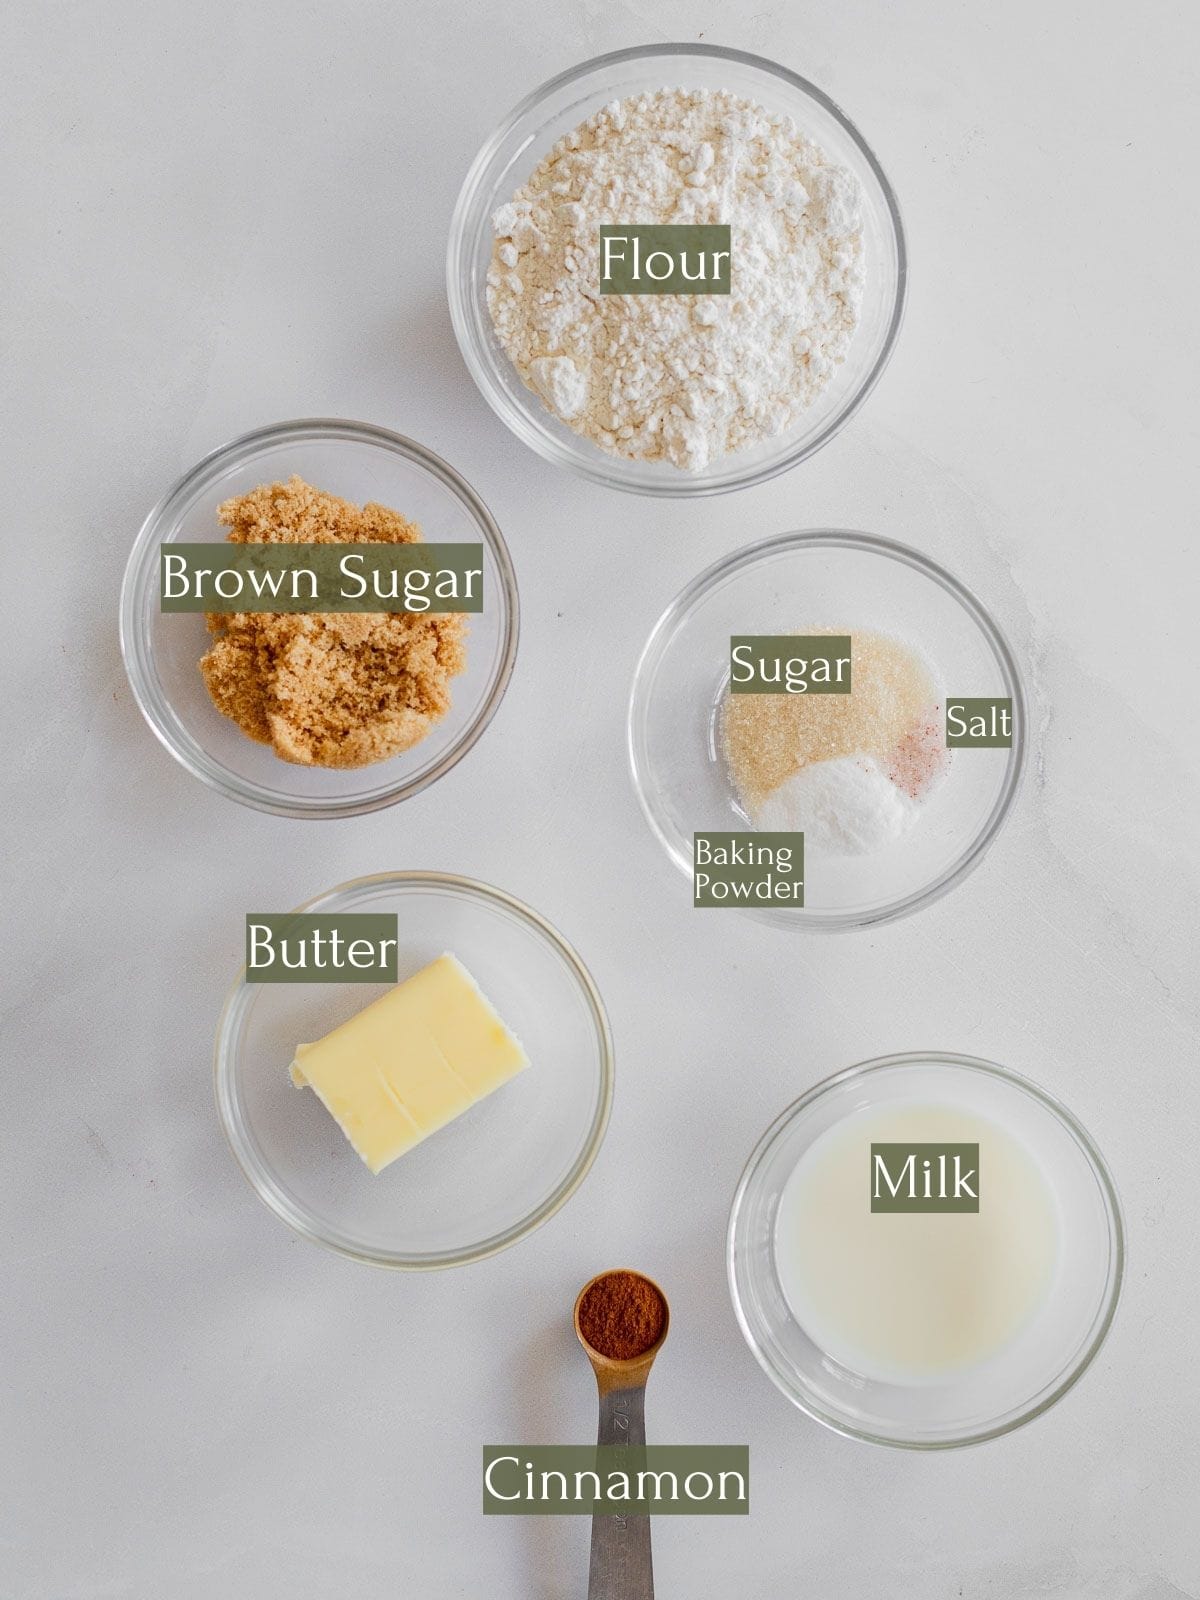 ingredients to make a single cinnamon roll labeled with green text.